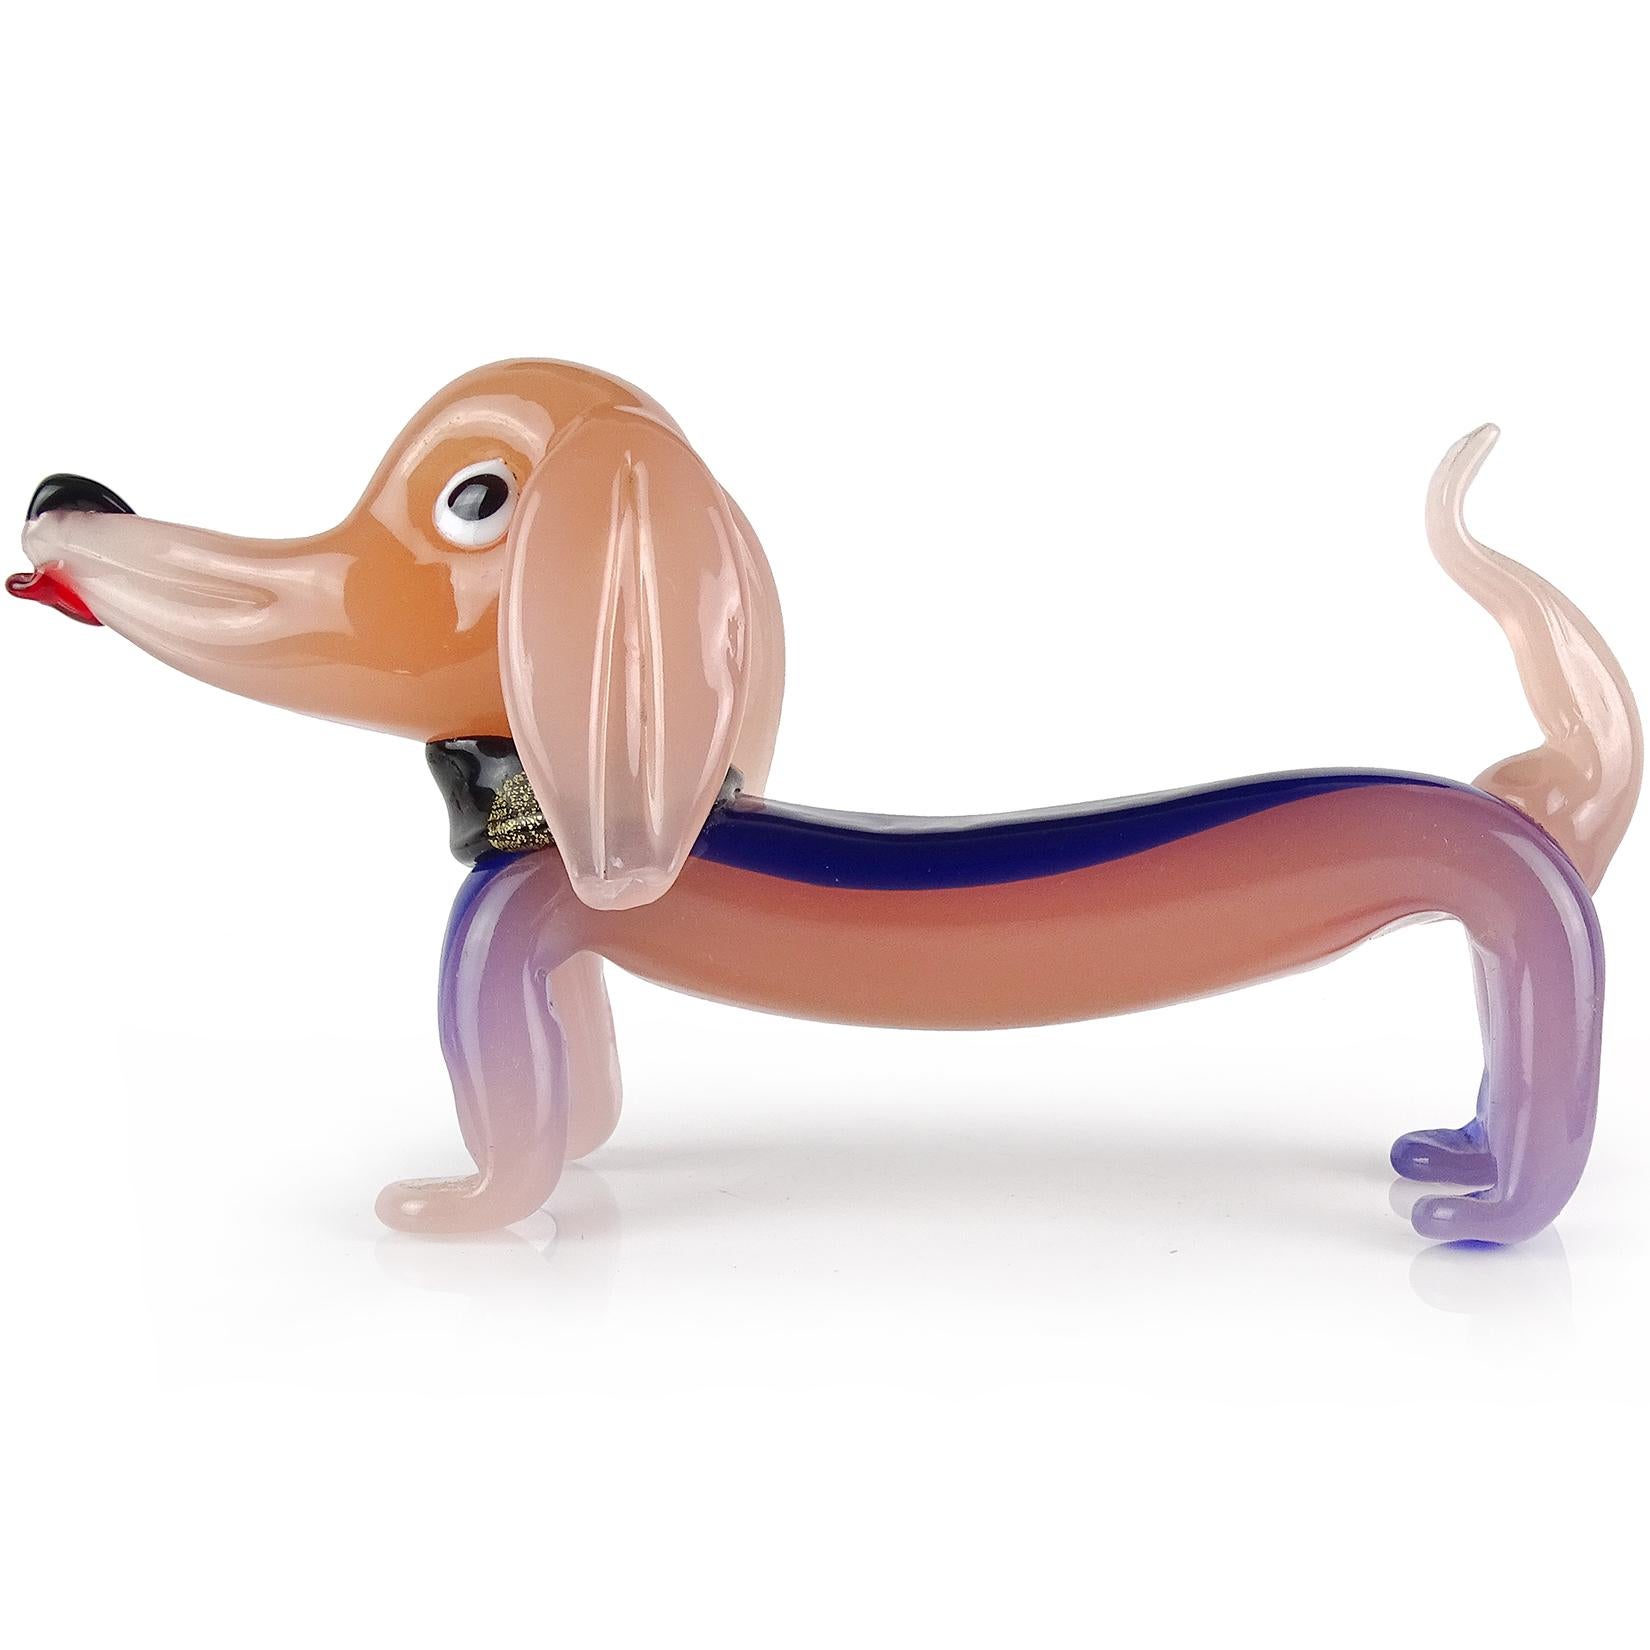 Beautiful and cute, vintage Murano hand blown opalescent peachy pink and blue Italian art glass Dachshund puppy dog sculpture. The puppy has a cartoony feel, with black collar, floppy ears, and tongue sticking out. The collar has gold leaf on it.